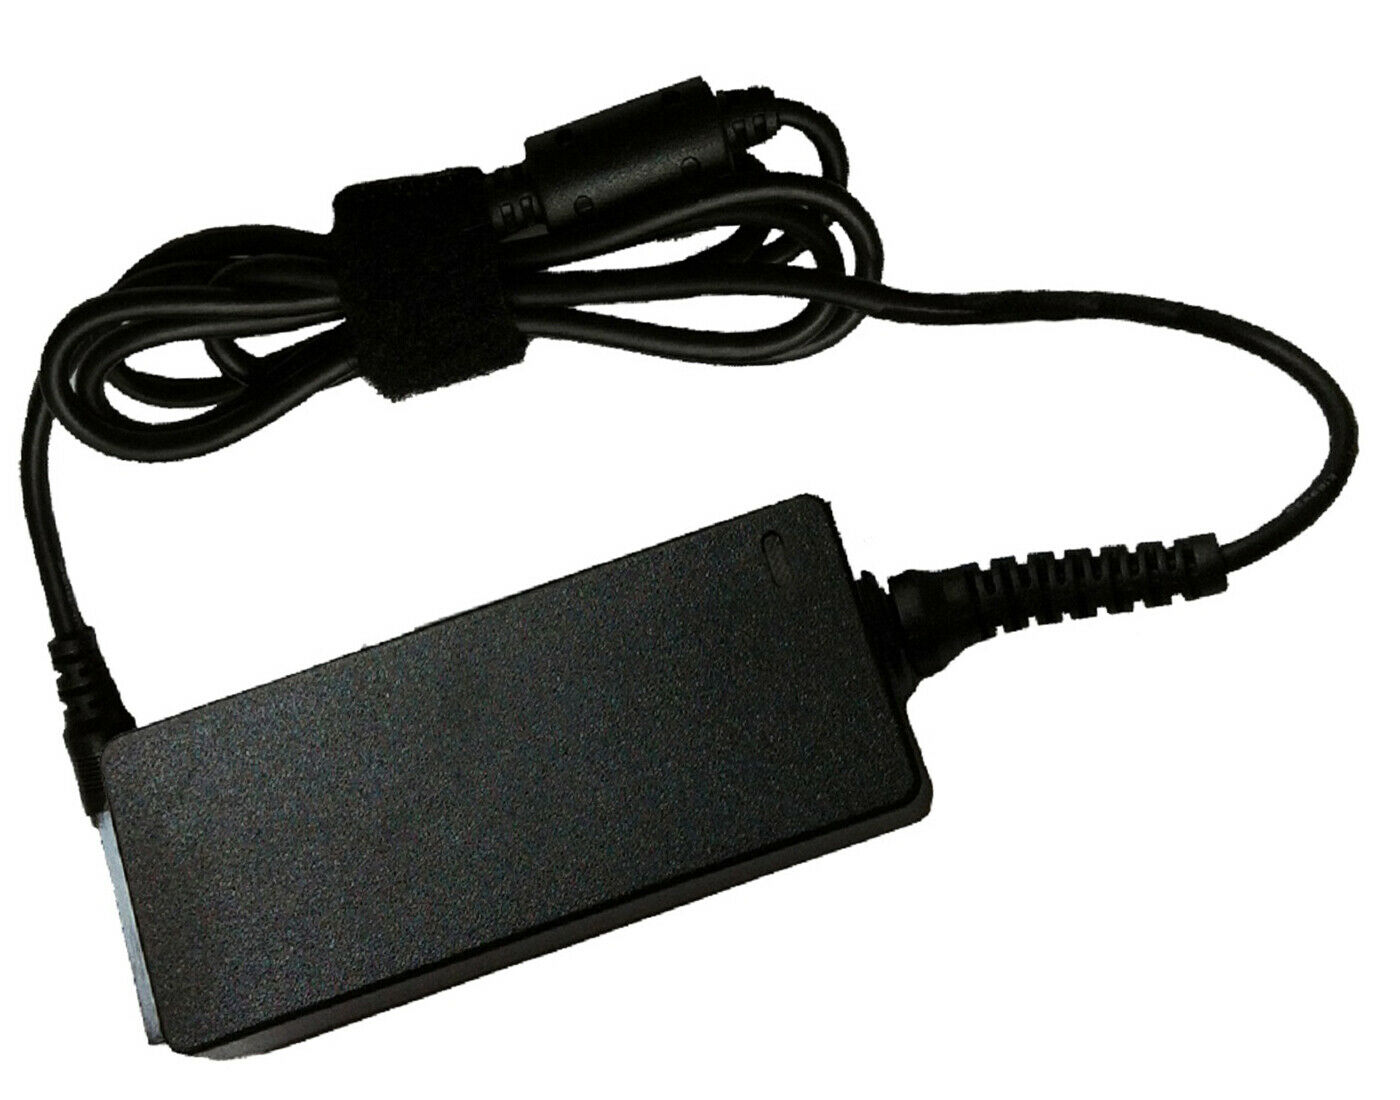 AC/DC Adapter For Boston Acoustics i-DS3 iDS3 Plus iPhone iPod Speaker System Compatible Brand: For Boston Acousti